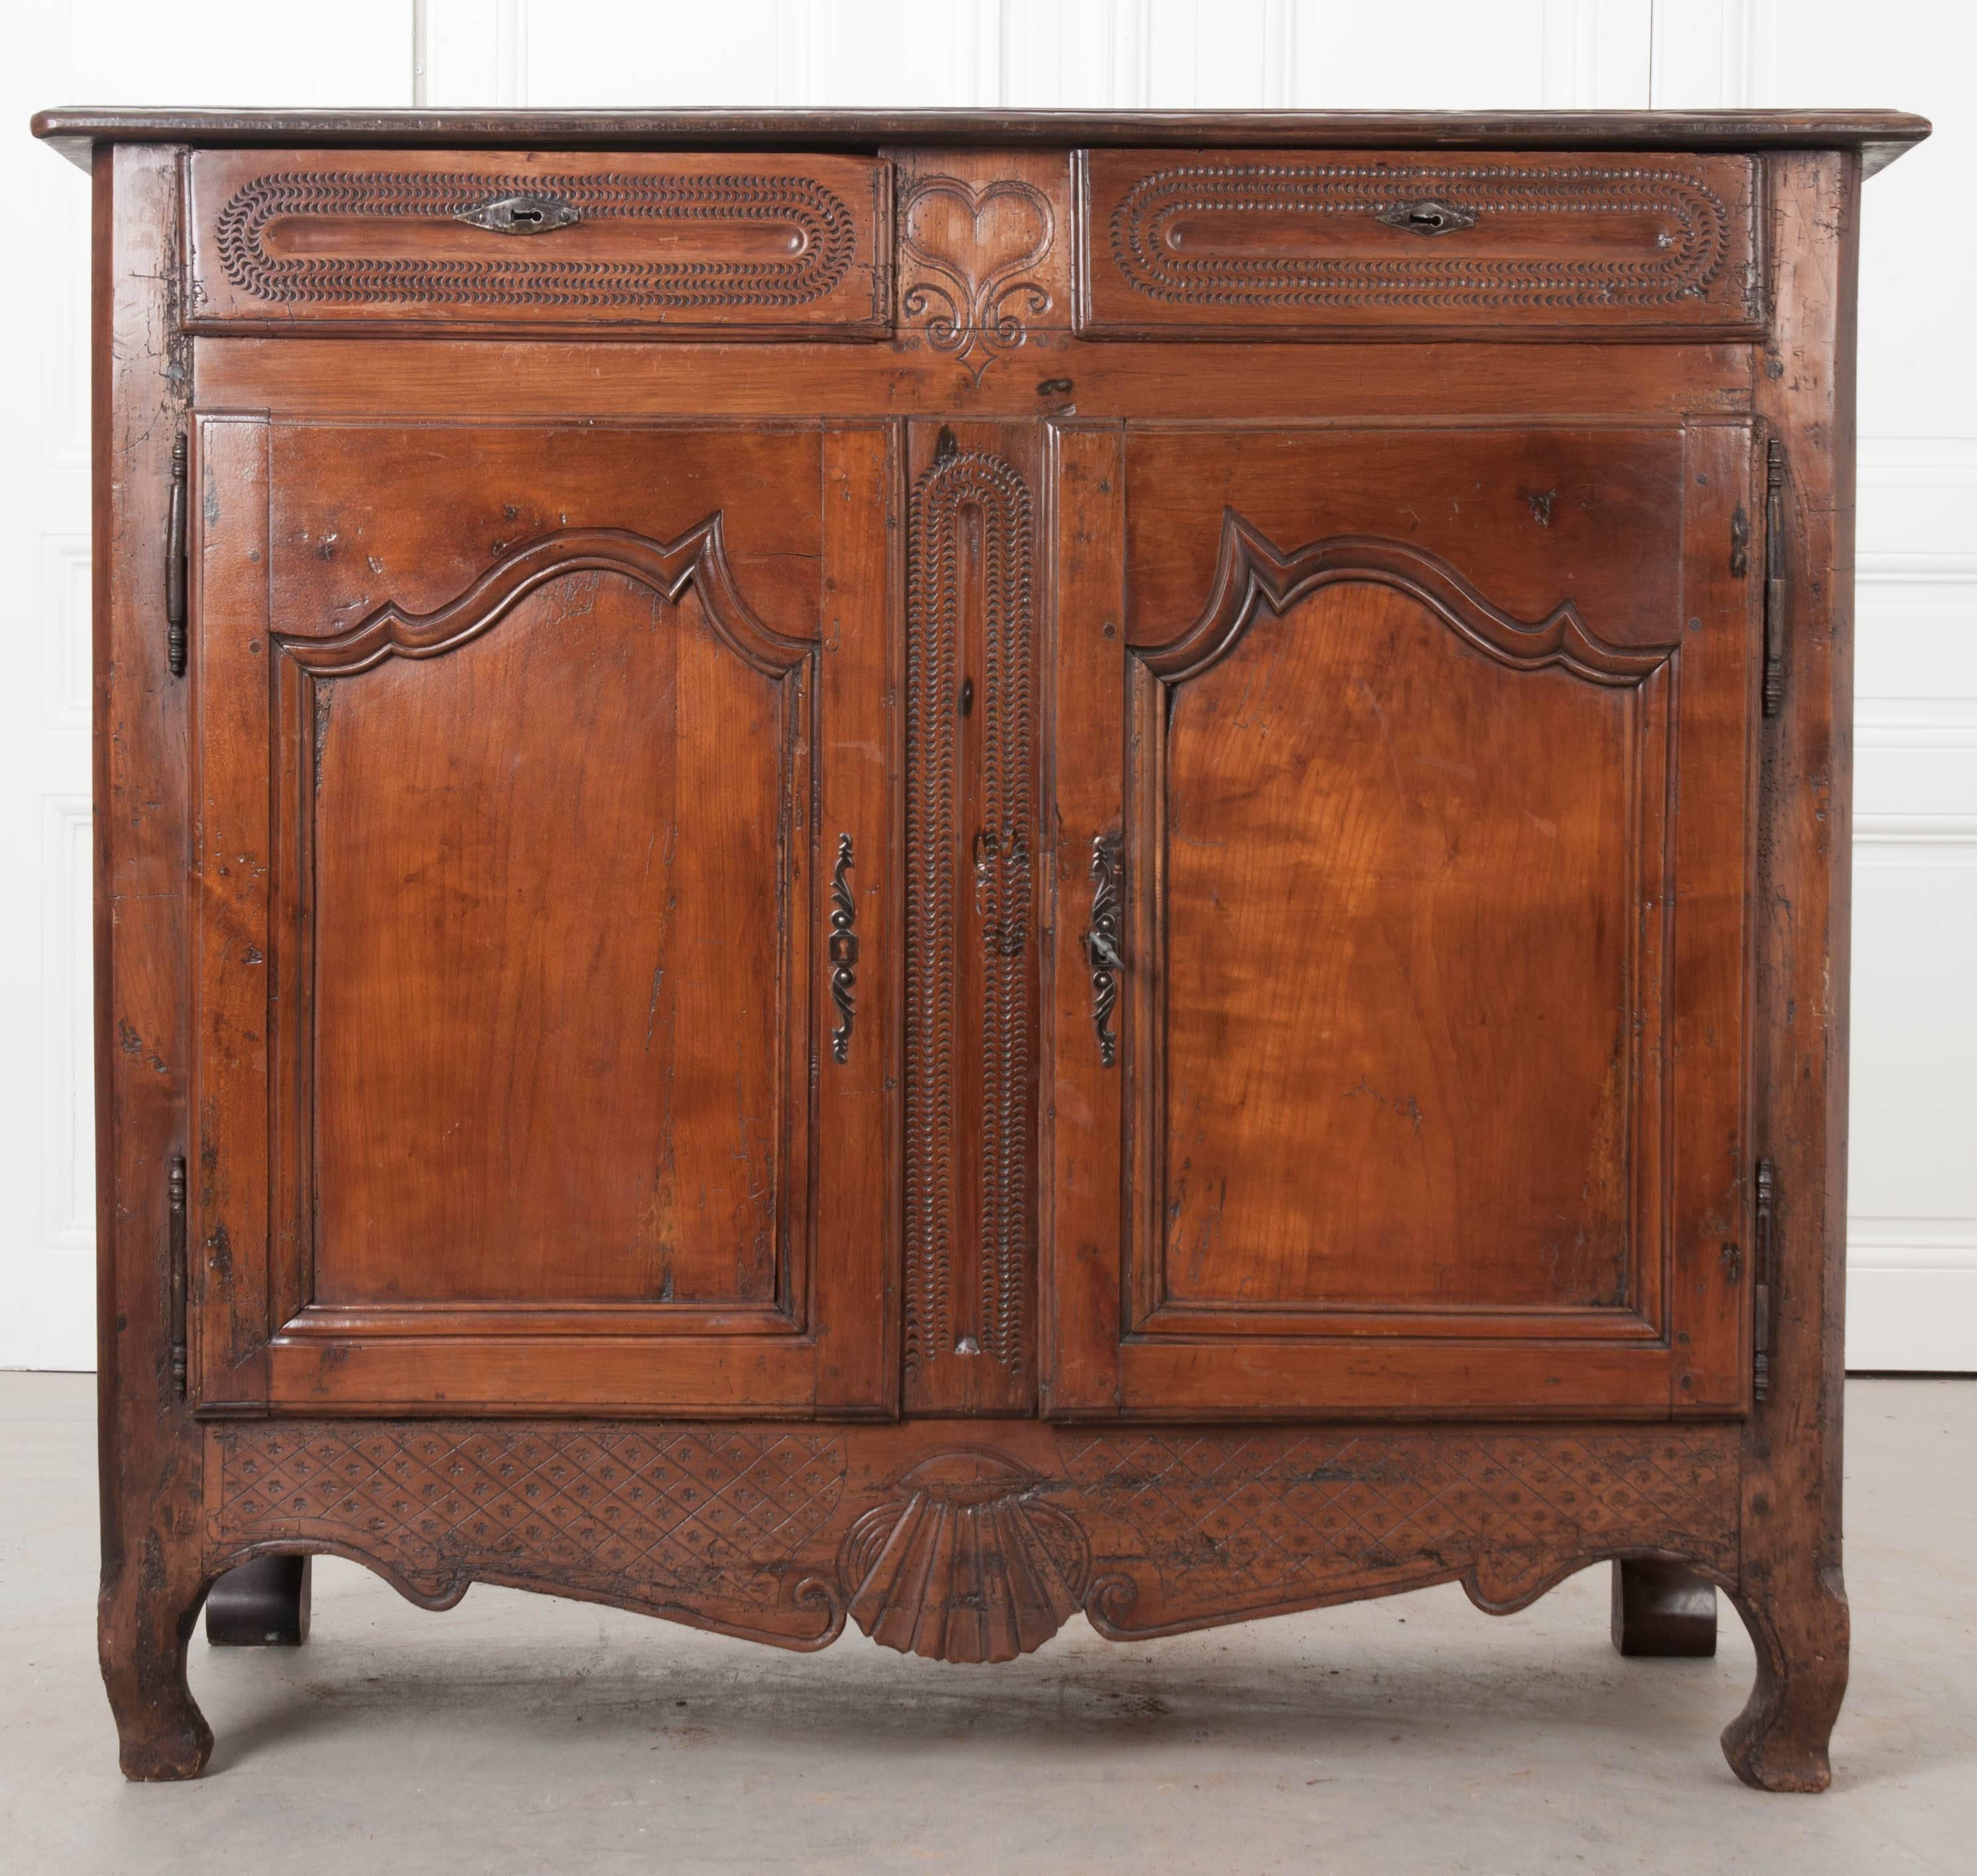 A charming, hand-carved cherry buffet from the late part of the 18th century. This remarkable antique features wonderfully carved details on nearly every surface. The two drawers that can be found in the apron are decorated with a continuous half